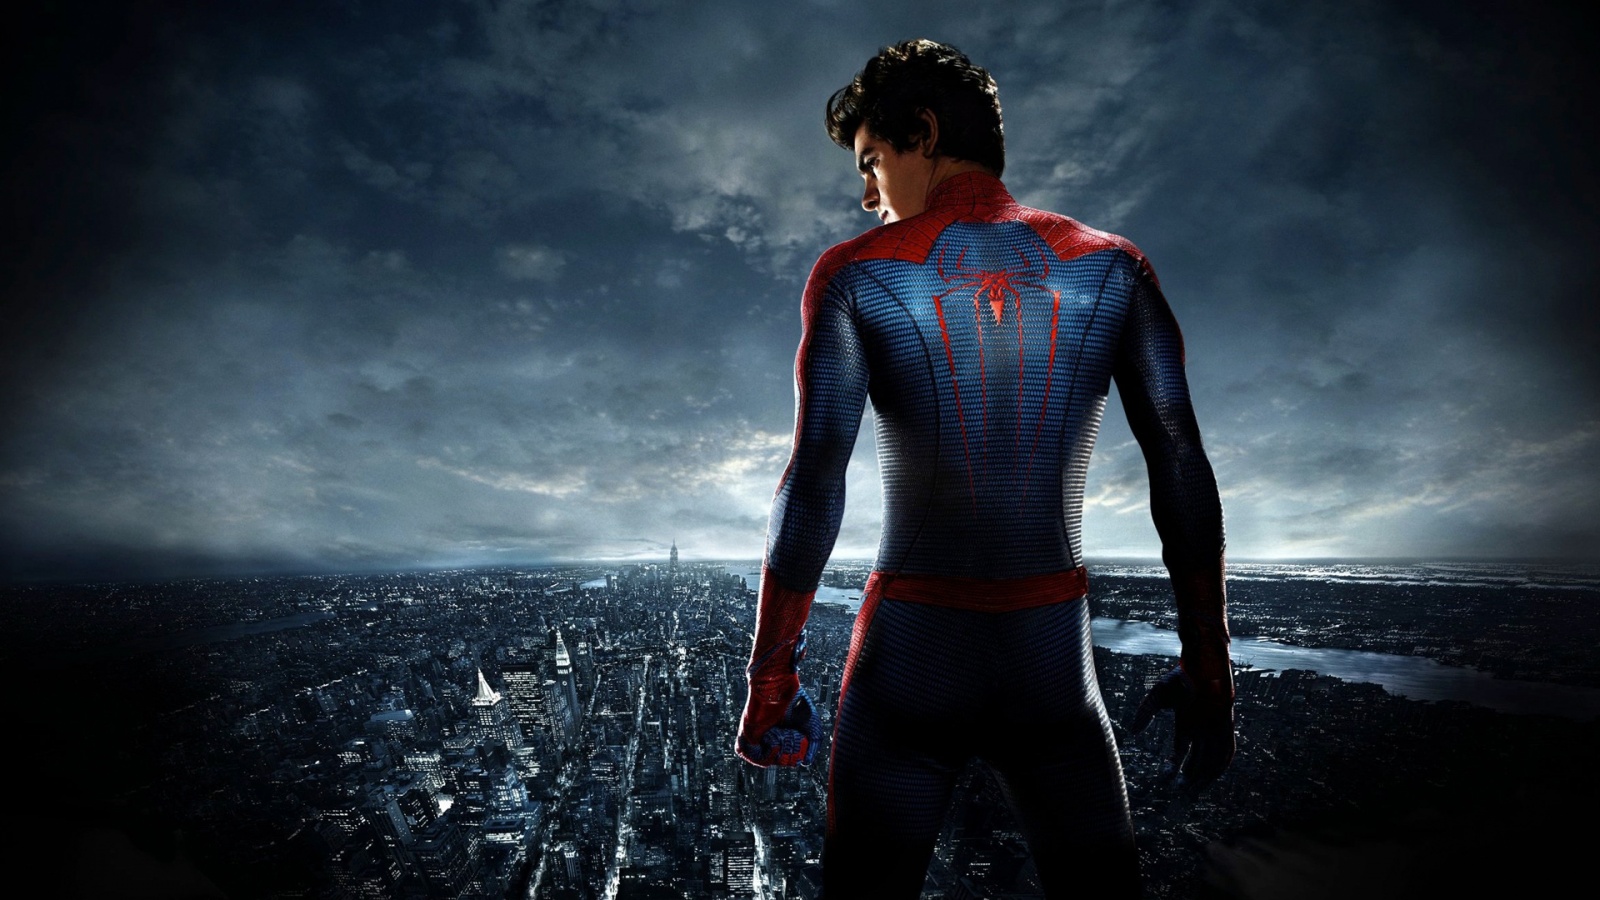 EVERY THING HD WALLPAPERS Spiderman New HD Wallpapers 2013 1600x900